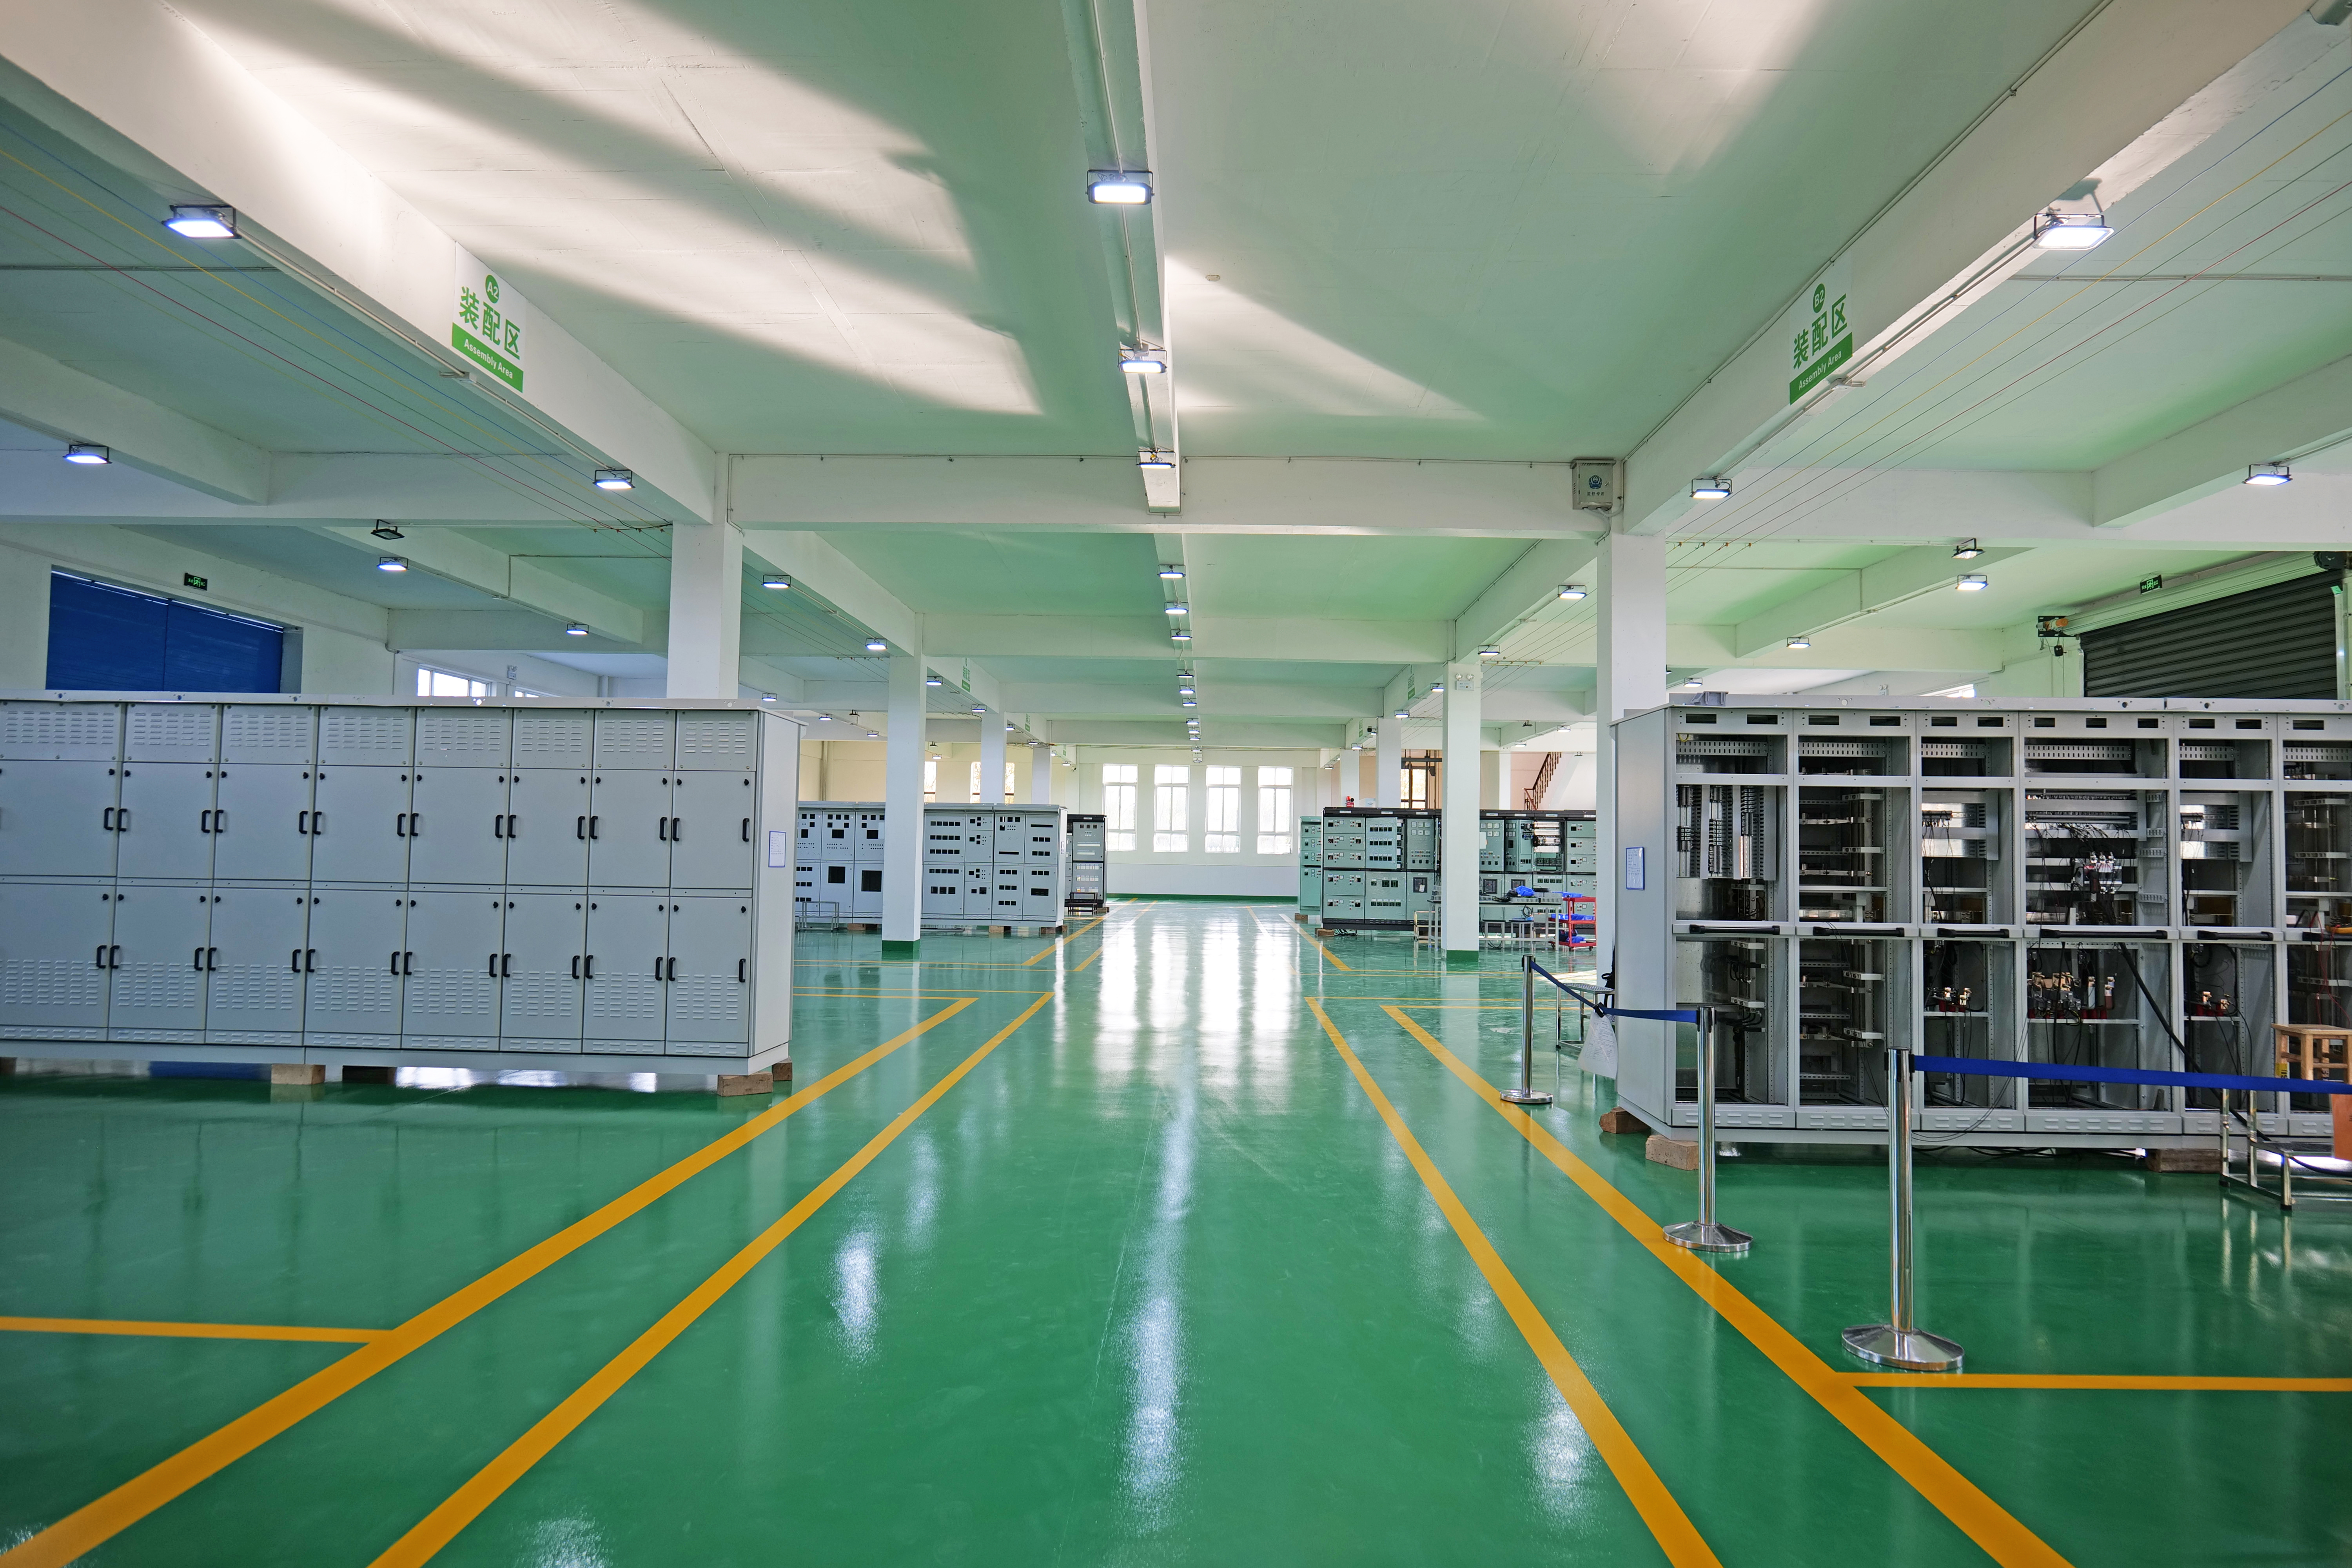 The image shows the Noris-Sibo production facility project assembly hall with green floor.